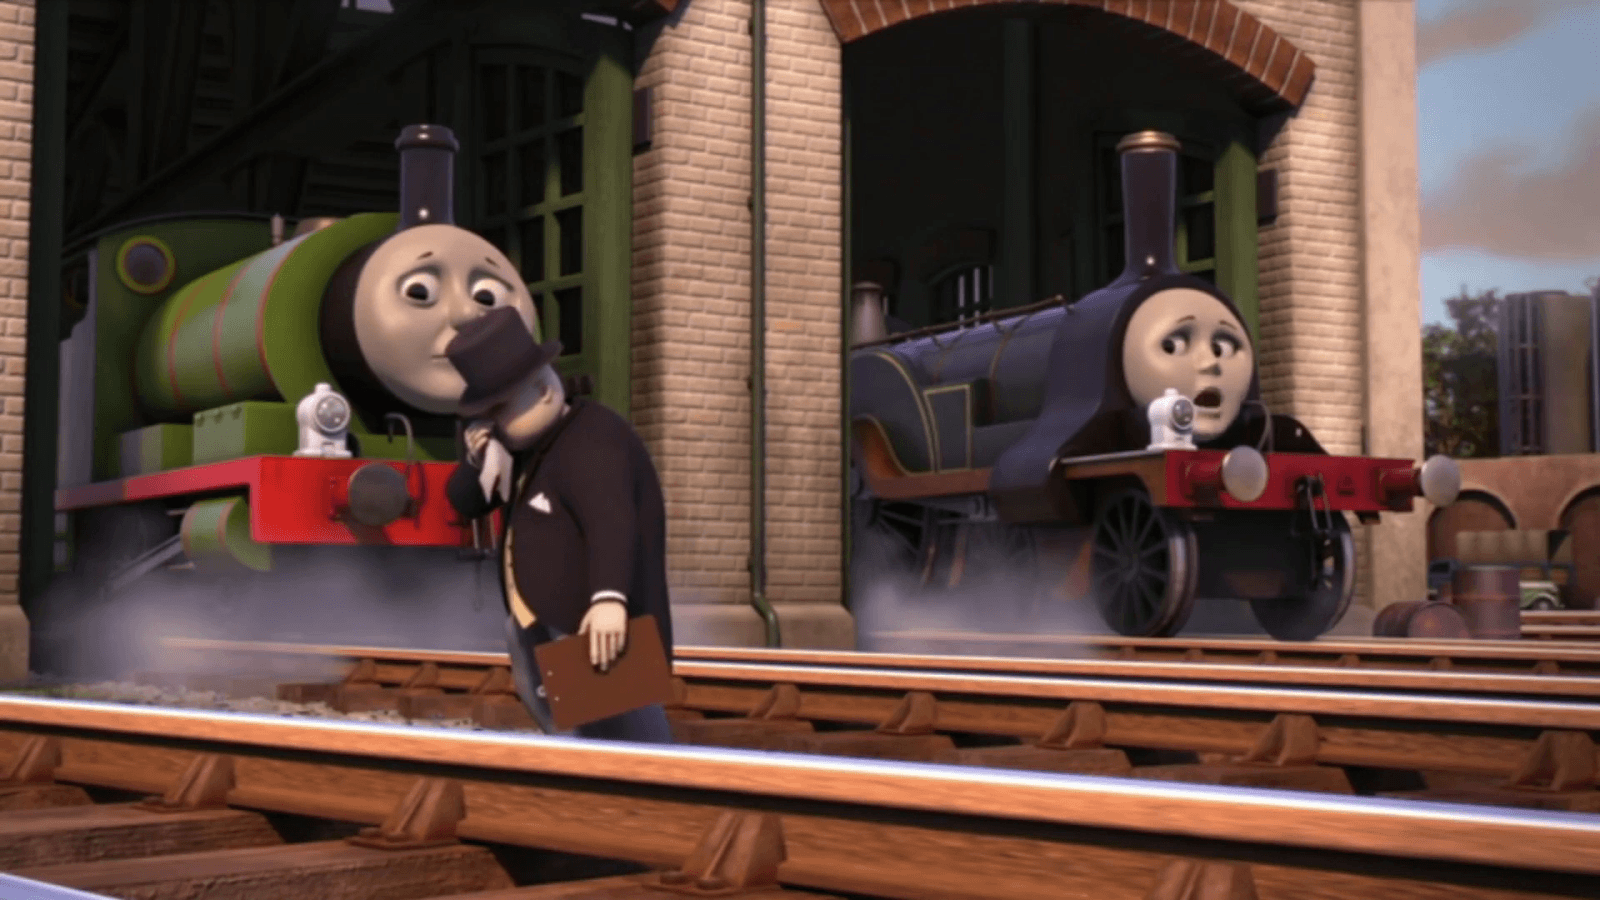 Dowager Hatt's Busy Day: ThomasNATION Review